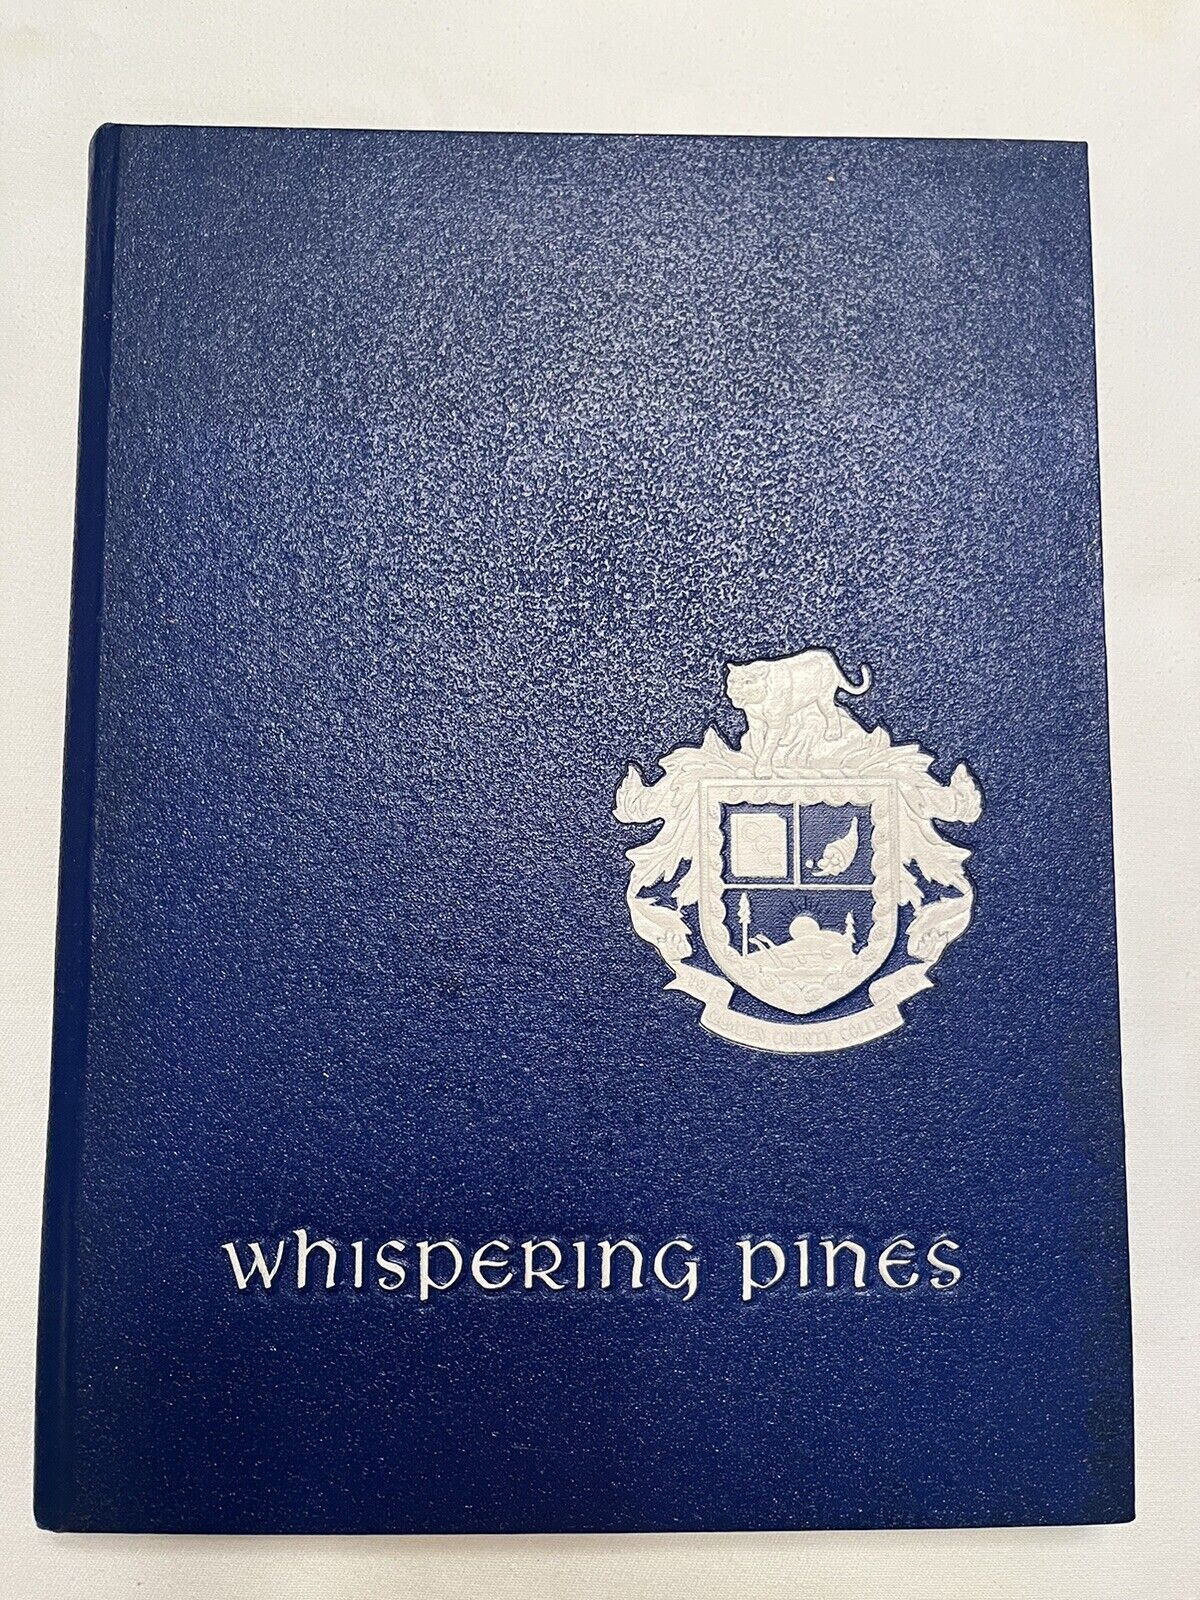 Camden County College 1969 Yearbook Whispering Pines Blackwood New Jersey 